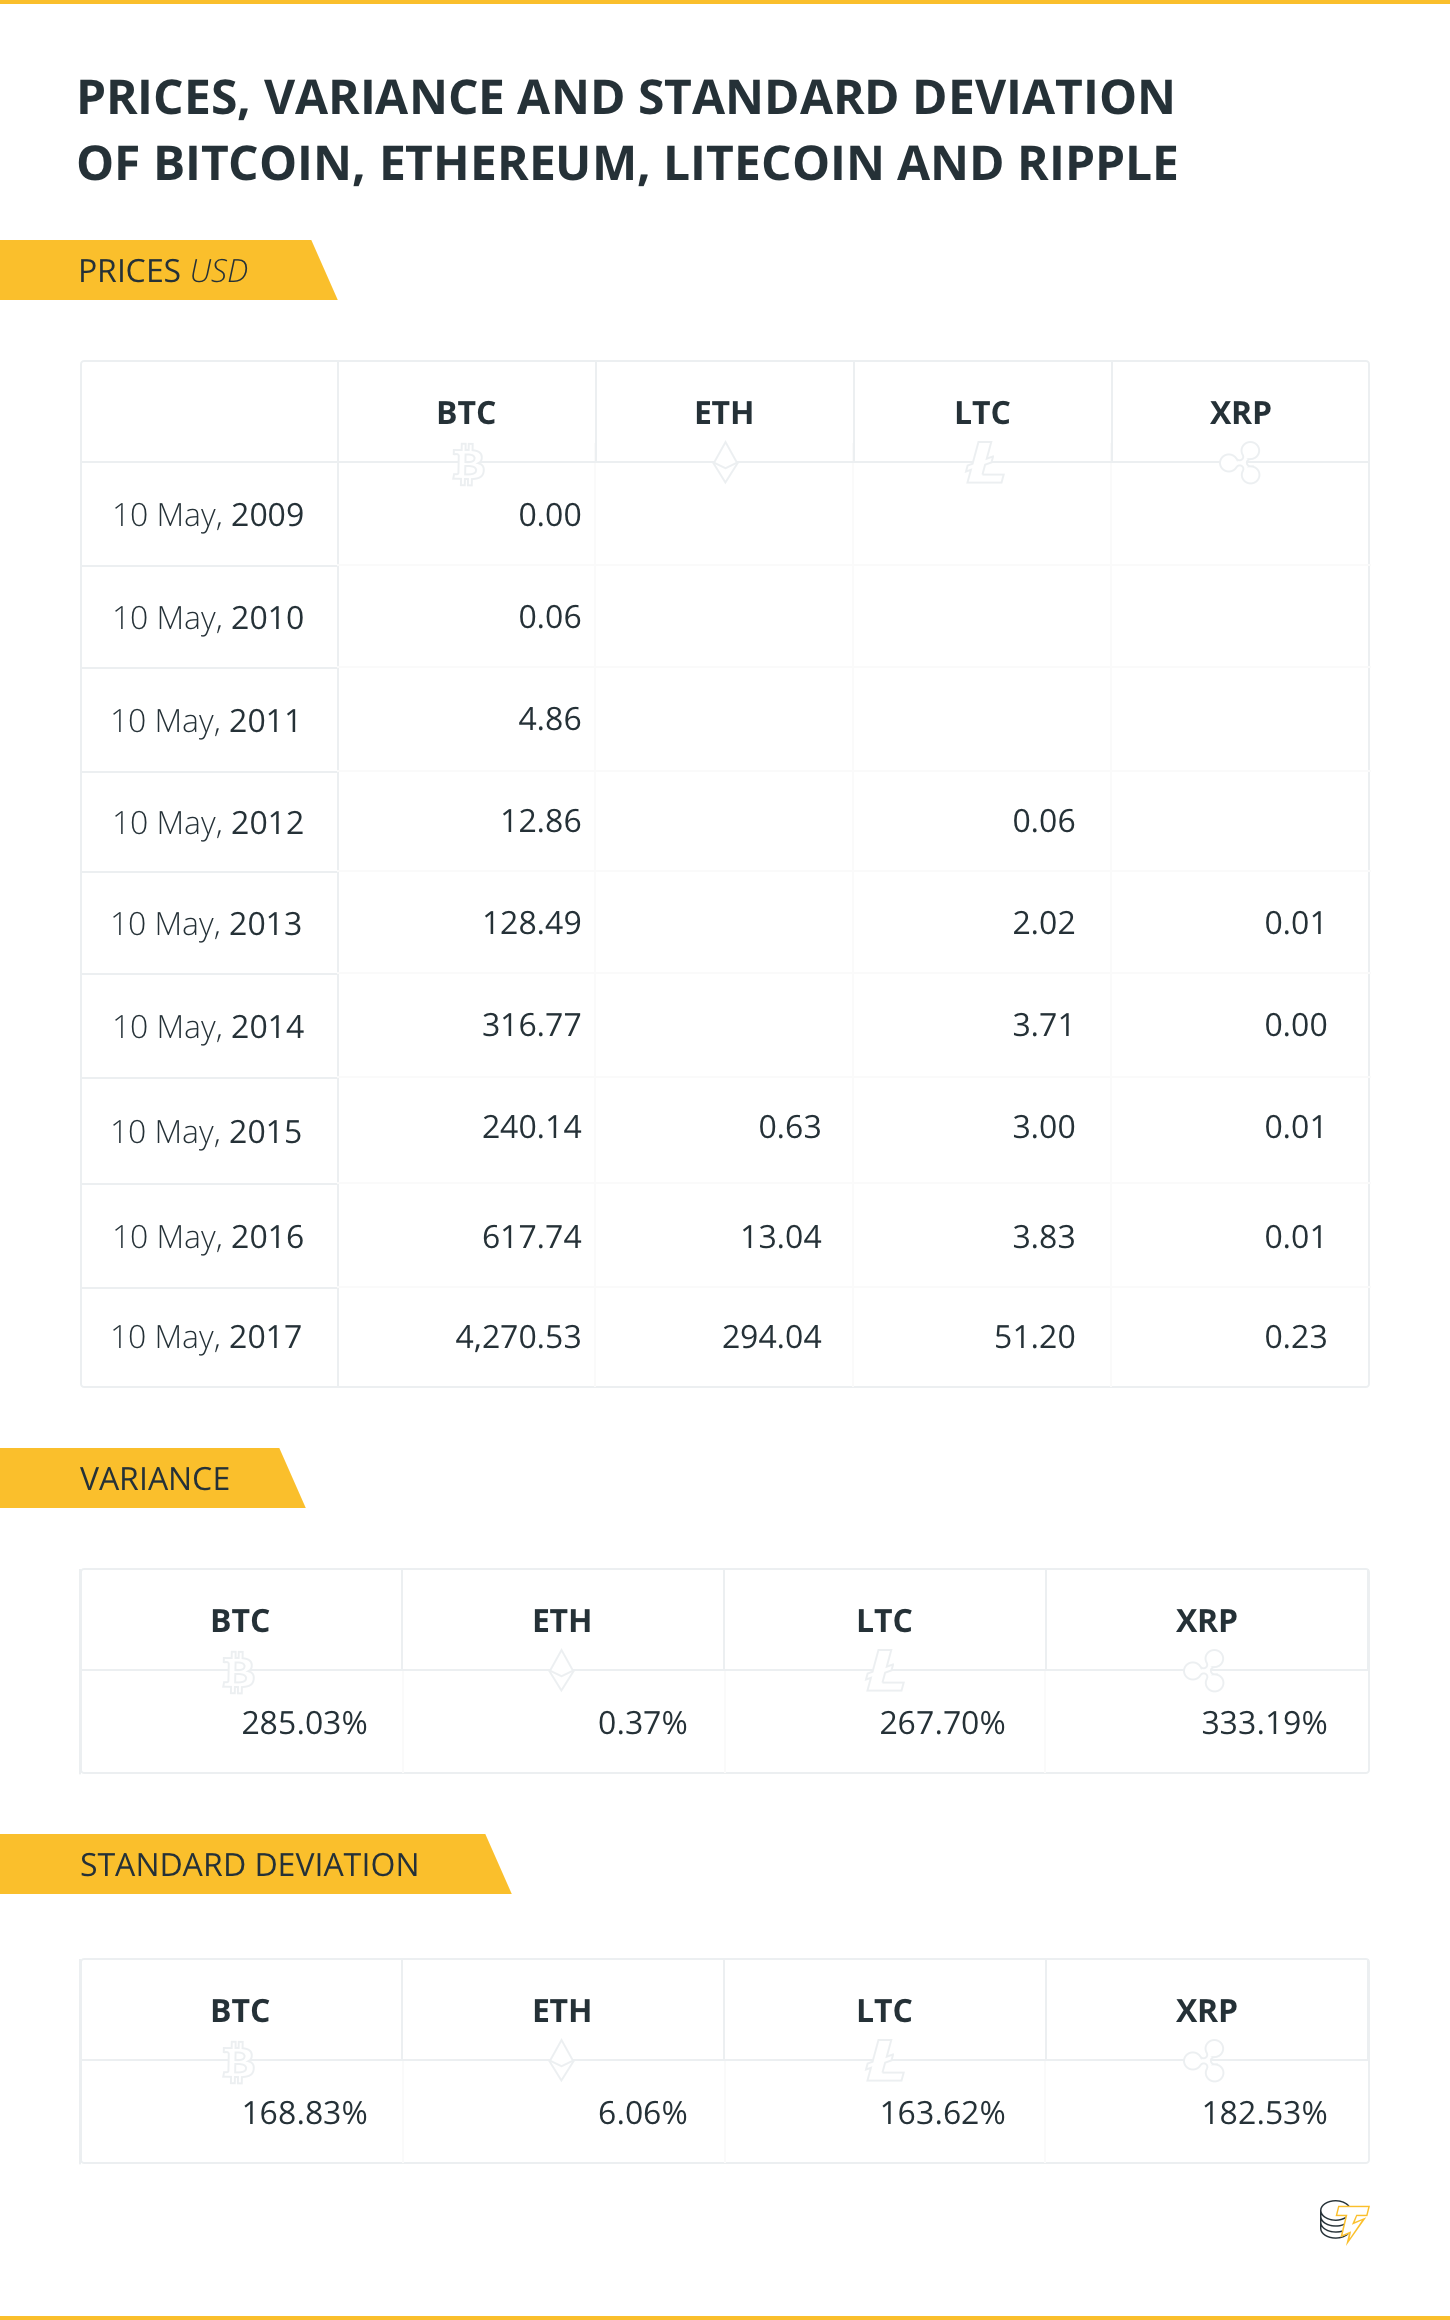 PRICES, VARIANCE AND STANDARD DEVIATION OF BTC, ETH, LTC, XRP